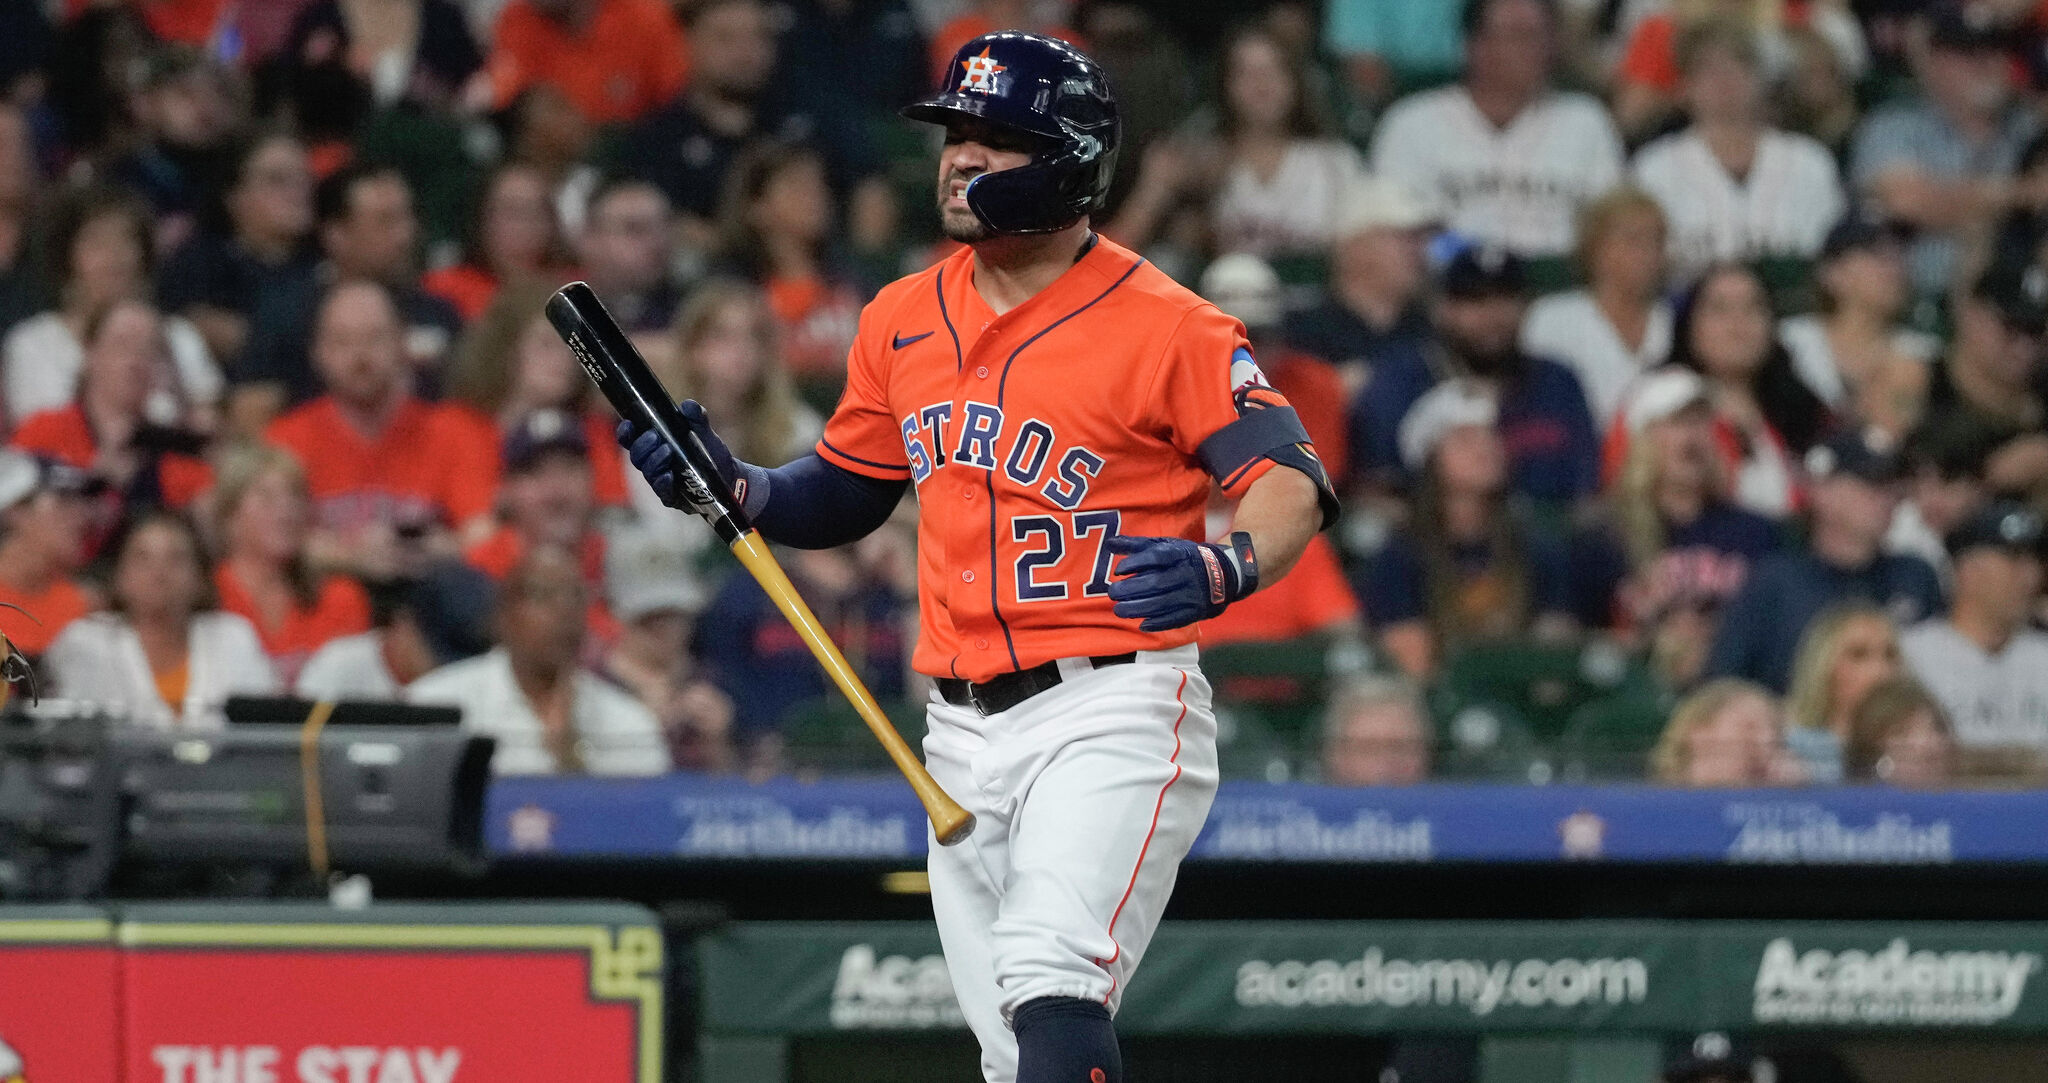 Astros' Jose Altuve exits after hit by pitch